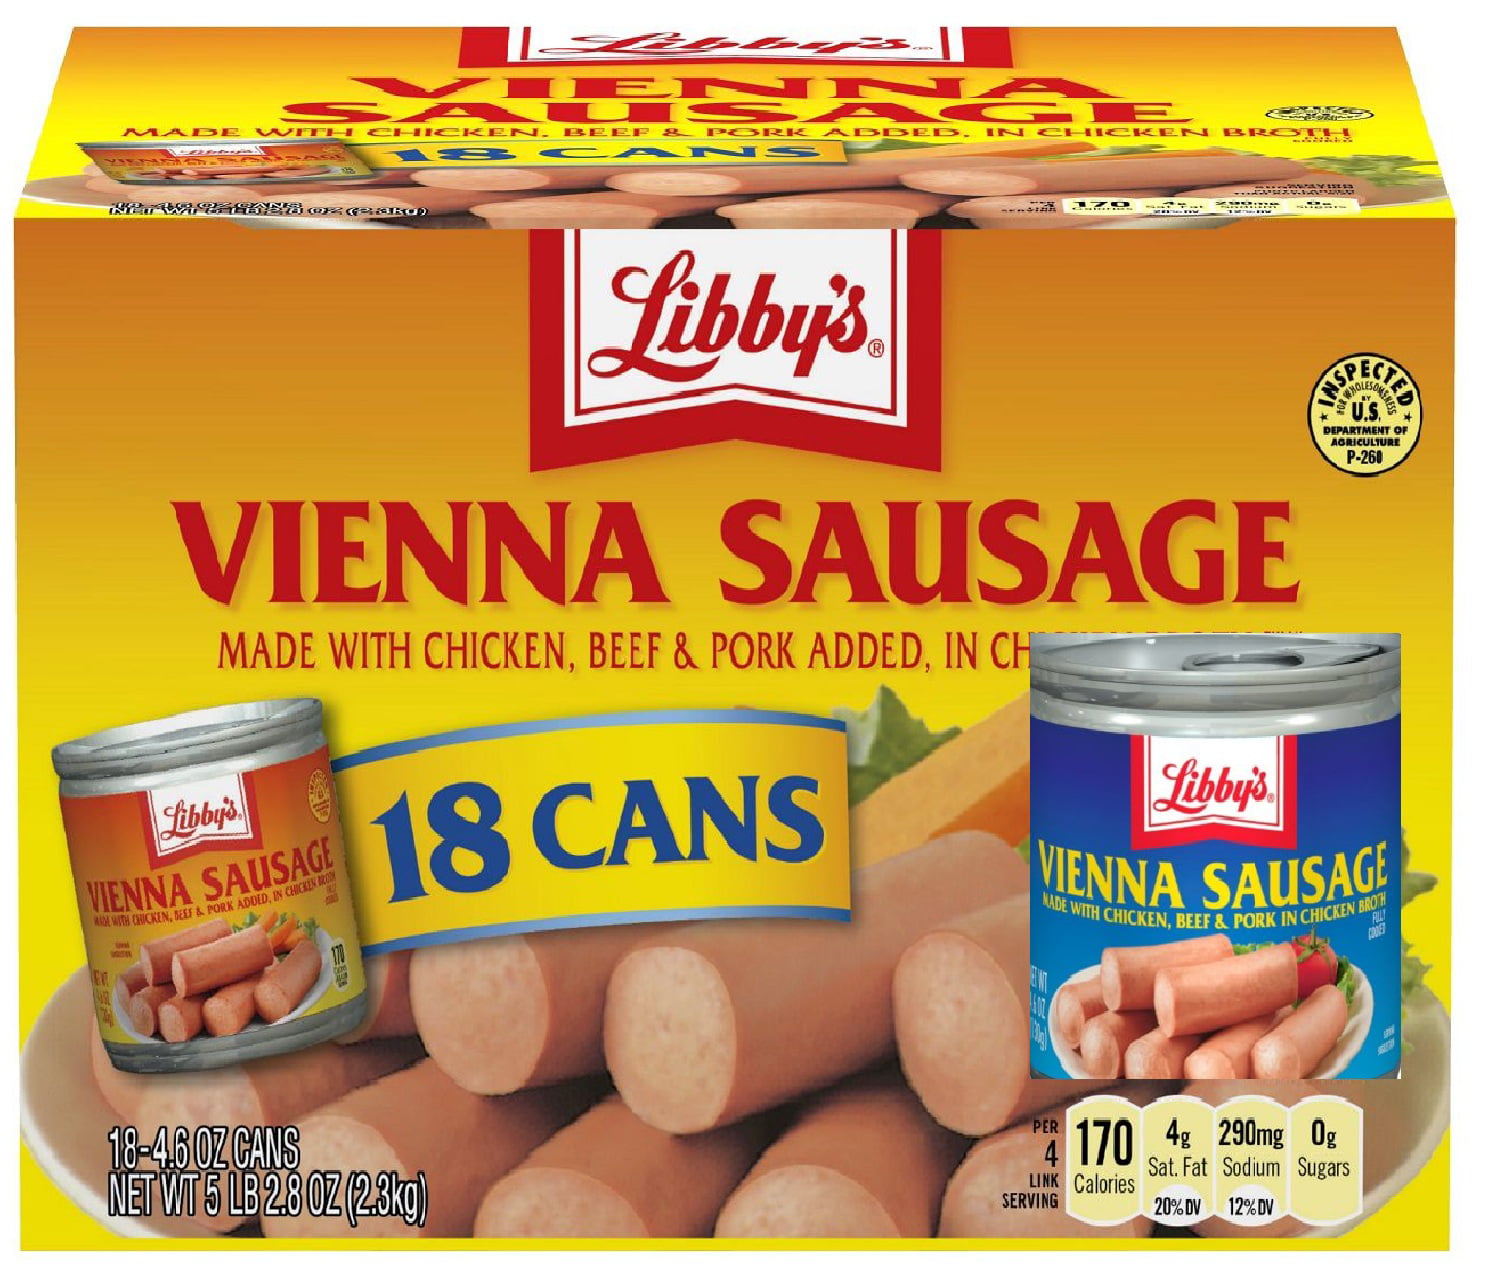 Case Of 36 Libby S Vienna Sausage Made With Chicken Beef And Pork In Chicke...